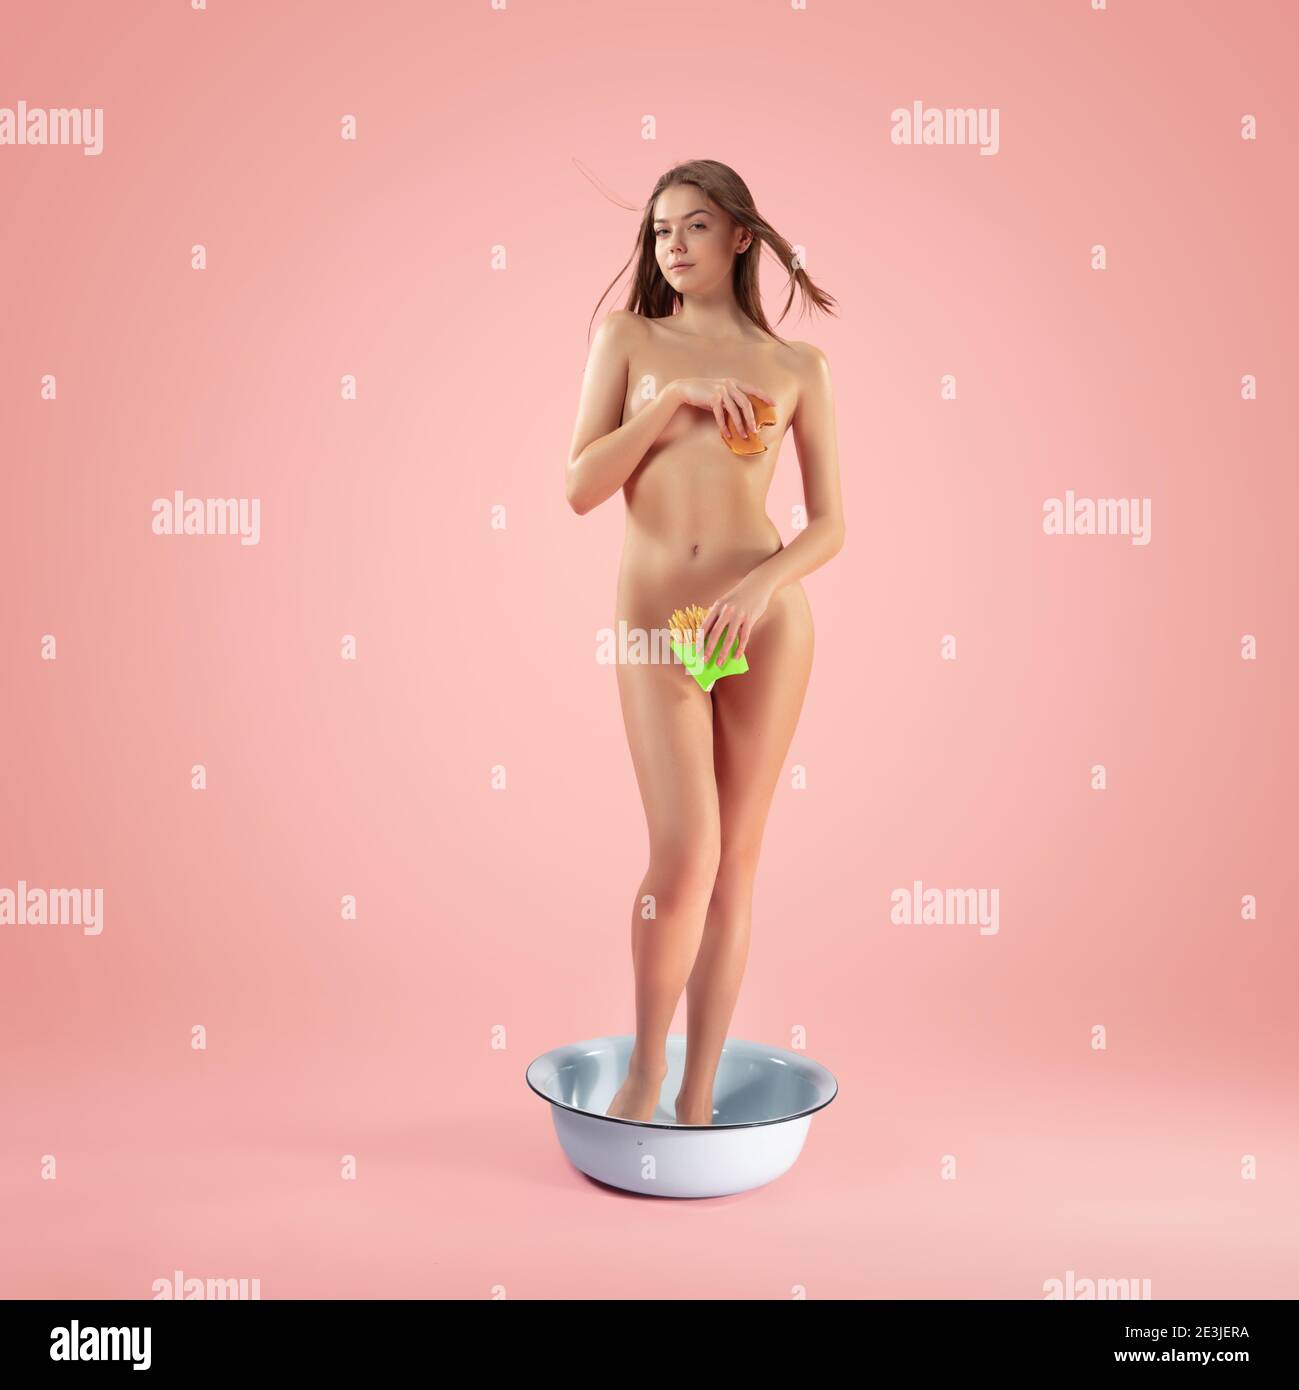 Fast food biting. Portrait of girl like modern remake of the Birth of Venus by Botticelli on pink background, copyspace. Comparison of eras, new look of classic paintings, artwork, inspiration concept. Stock Photo